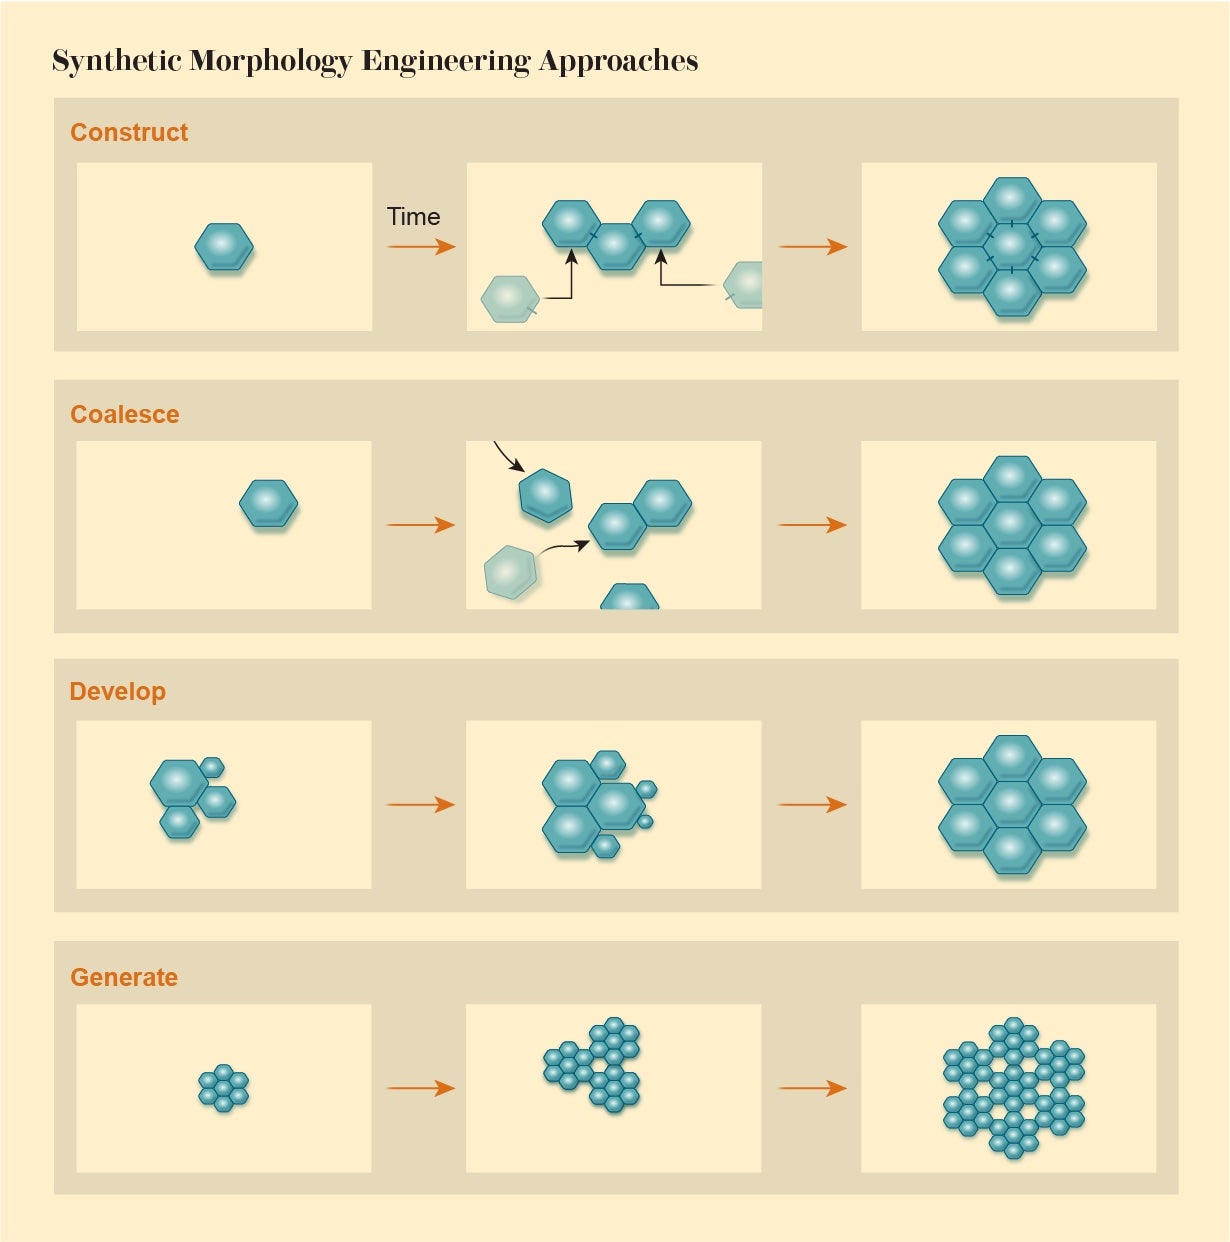 Graphic shows four synthetic morphology engineering approaches; construct, coalesce, develop and generate.